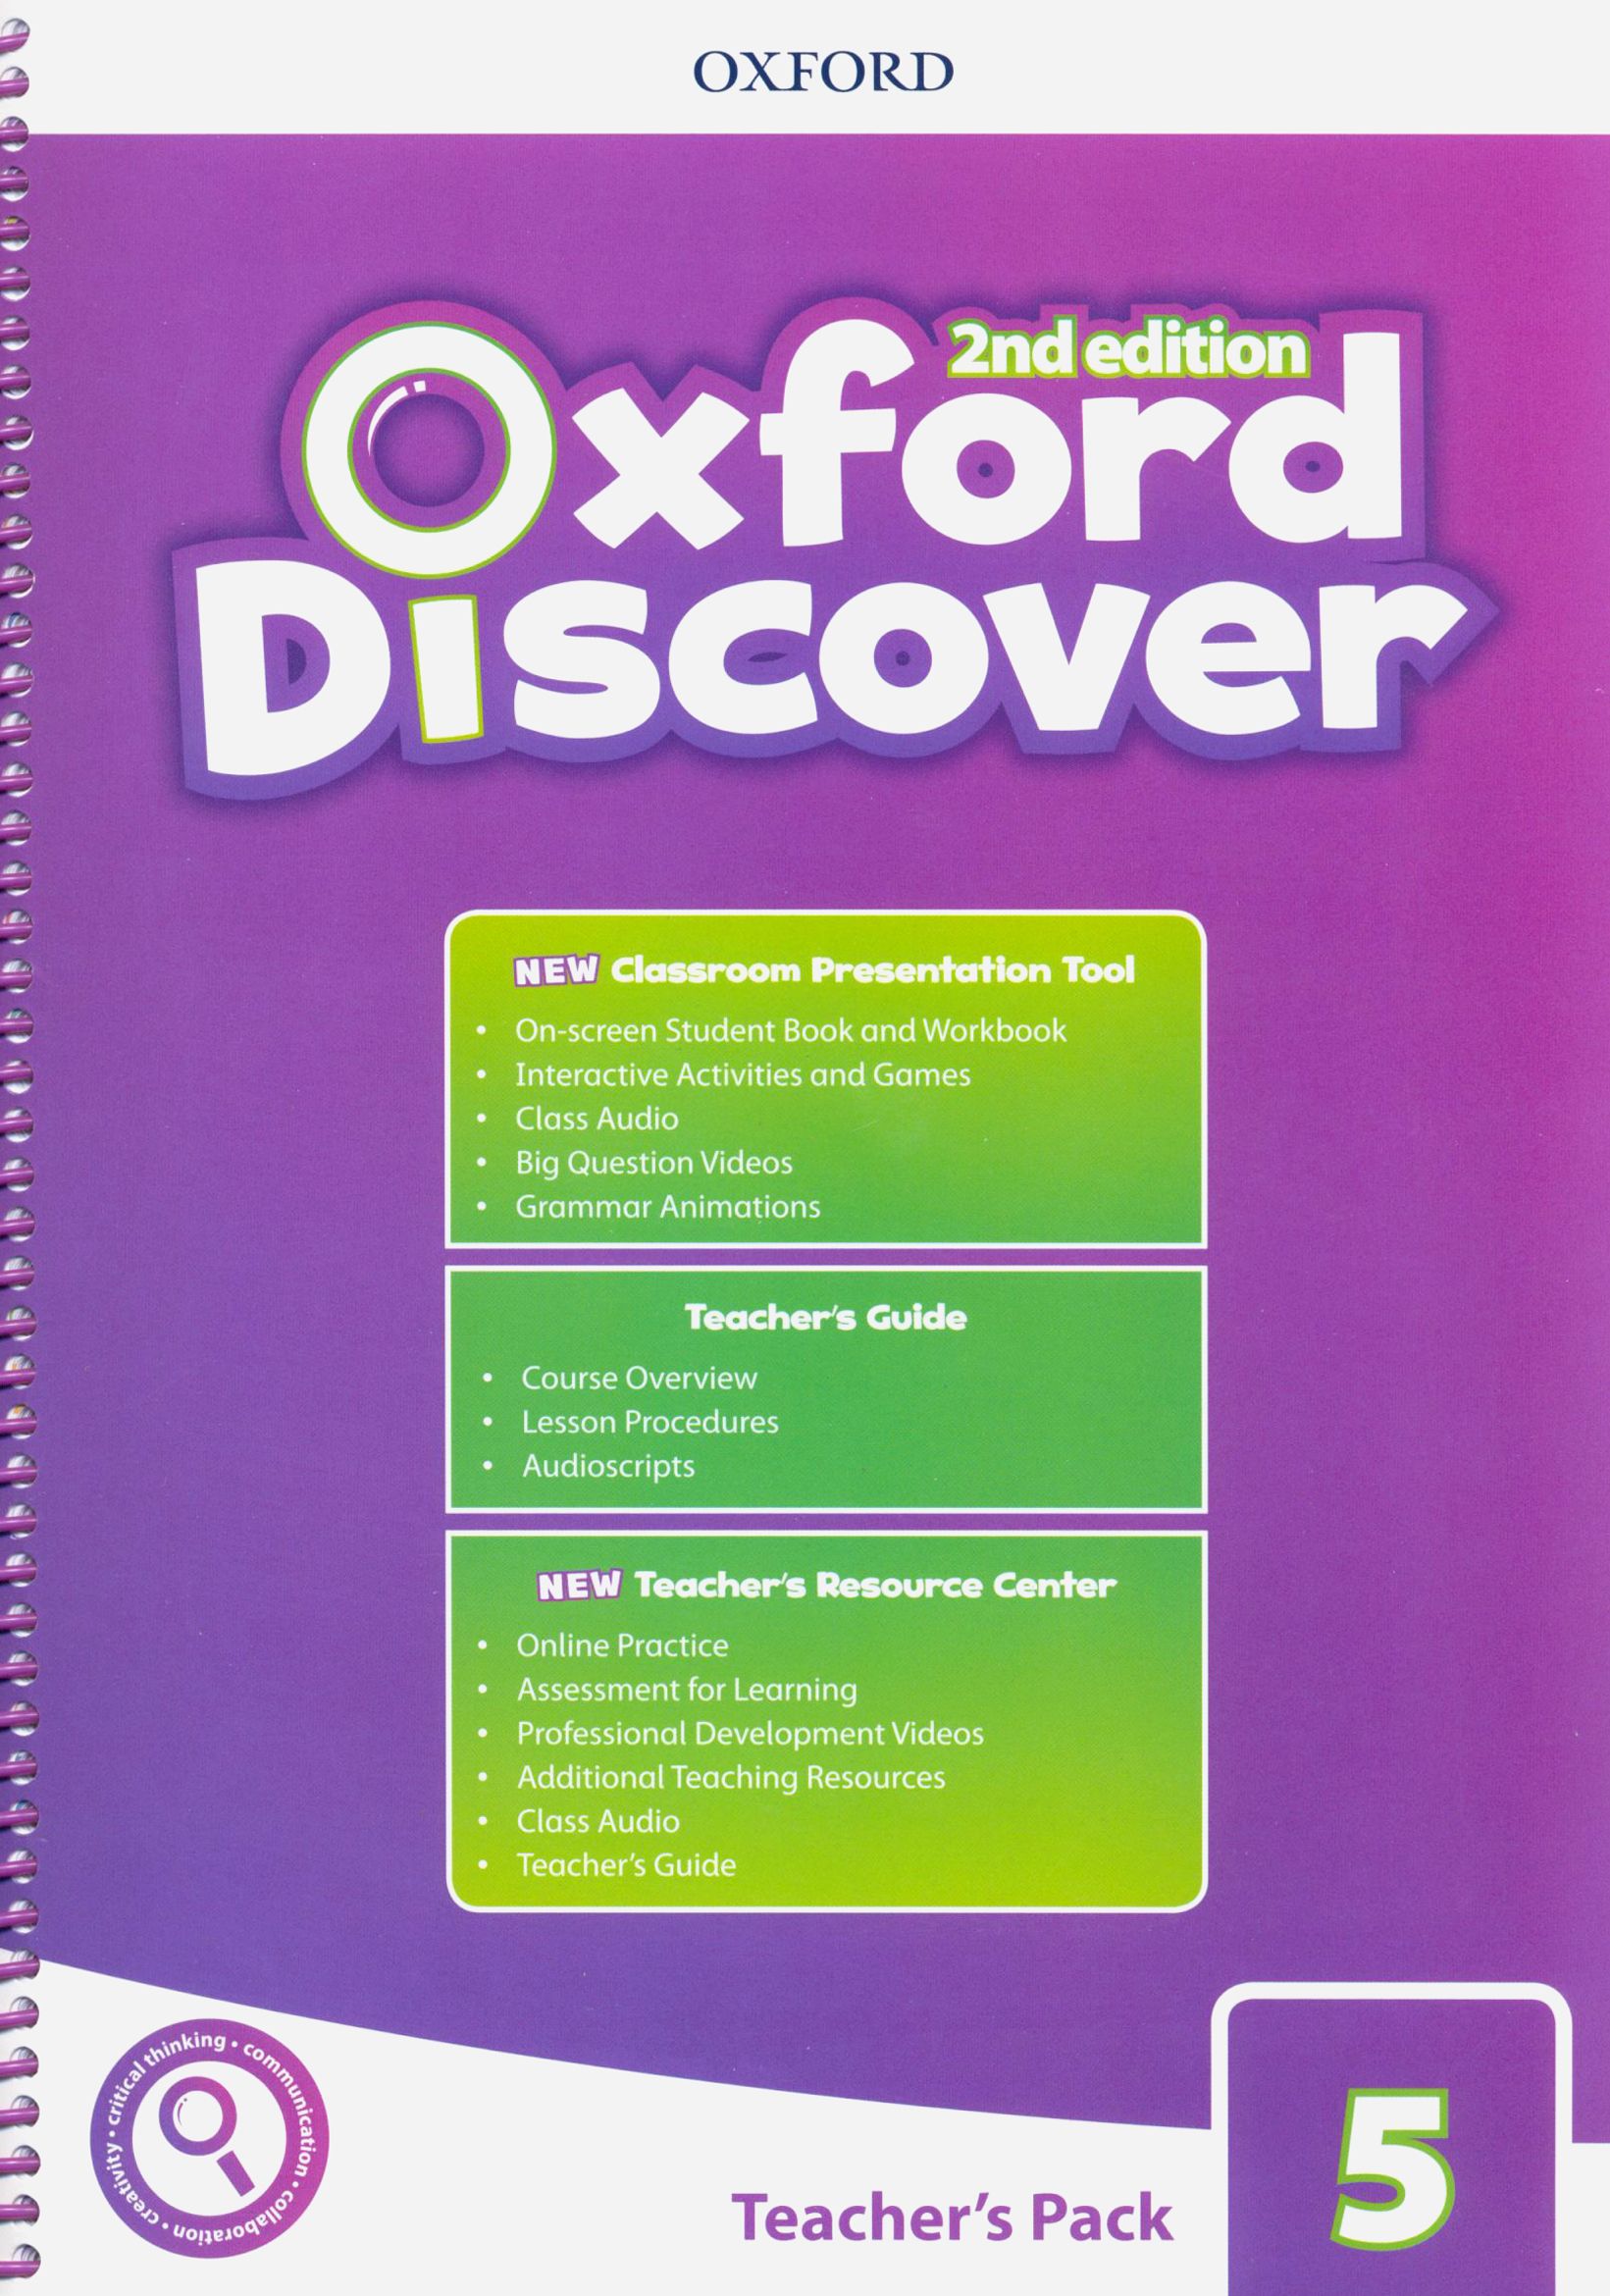 Oxford discover book. Oxford discover 2nd Edition 5. Oxford discover 2nd Edition. Oxford discover 4 2nd Edition. Oxford discover 2nd Edition 2 Grammar.